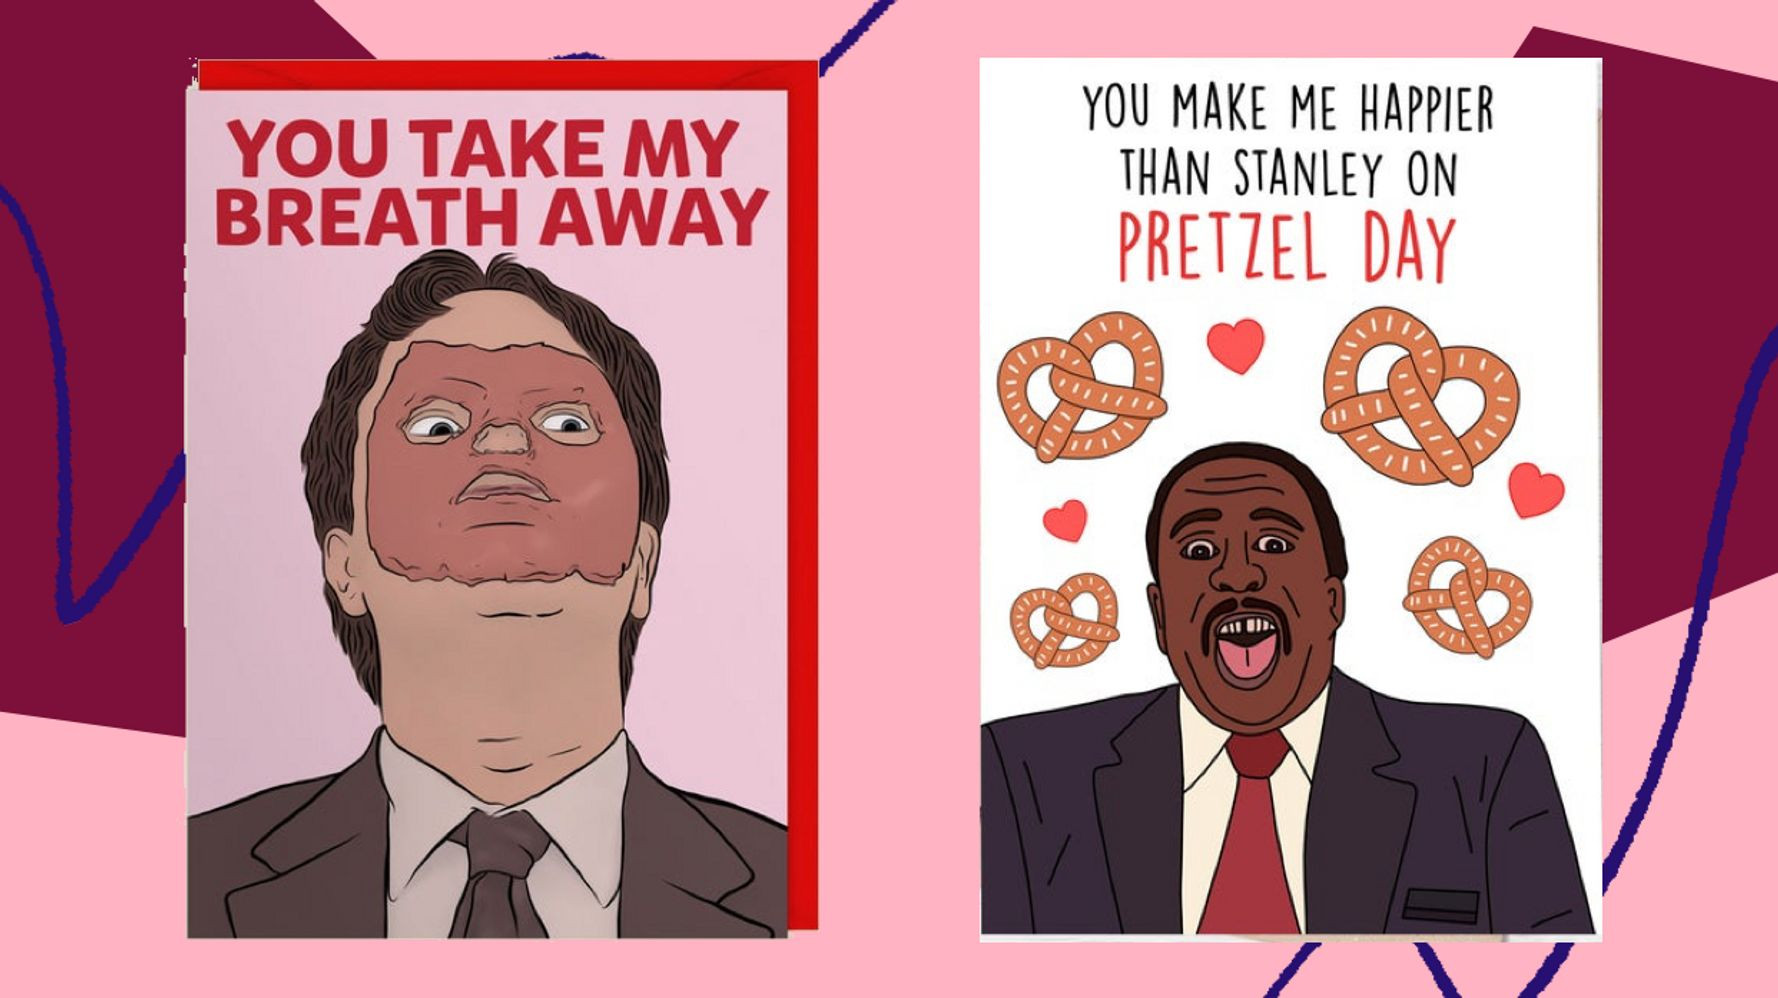 The Office Valentines Day Quotes
 Funny The fice Valentine s Day Cards For The Jim To